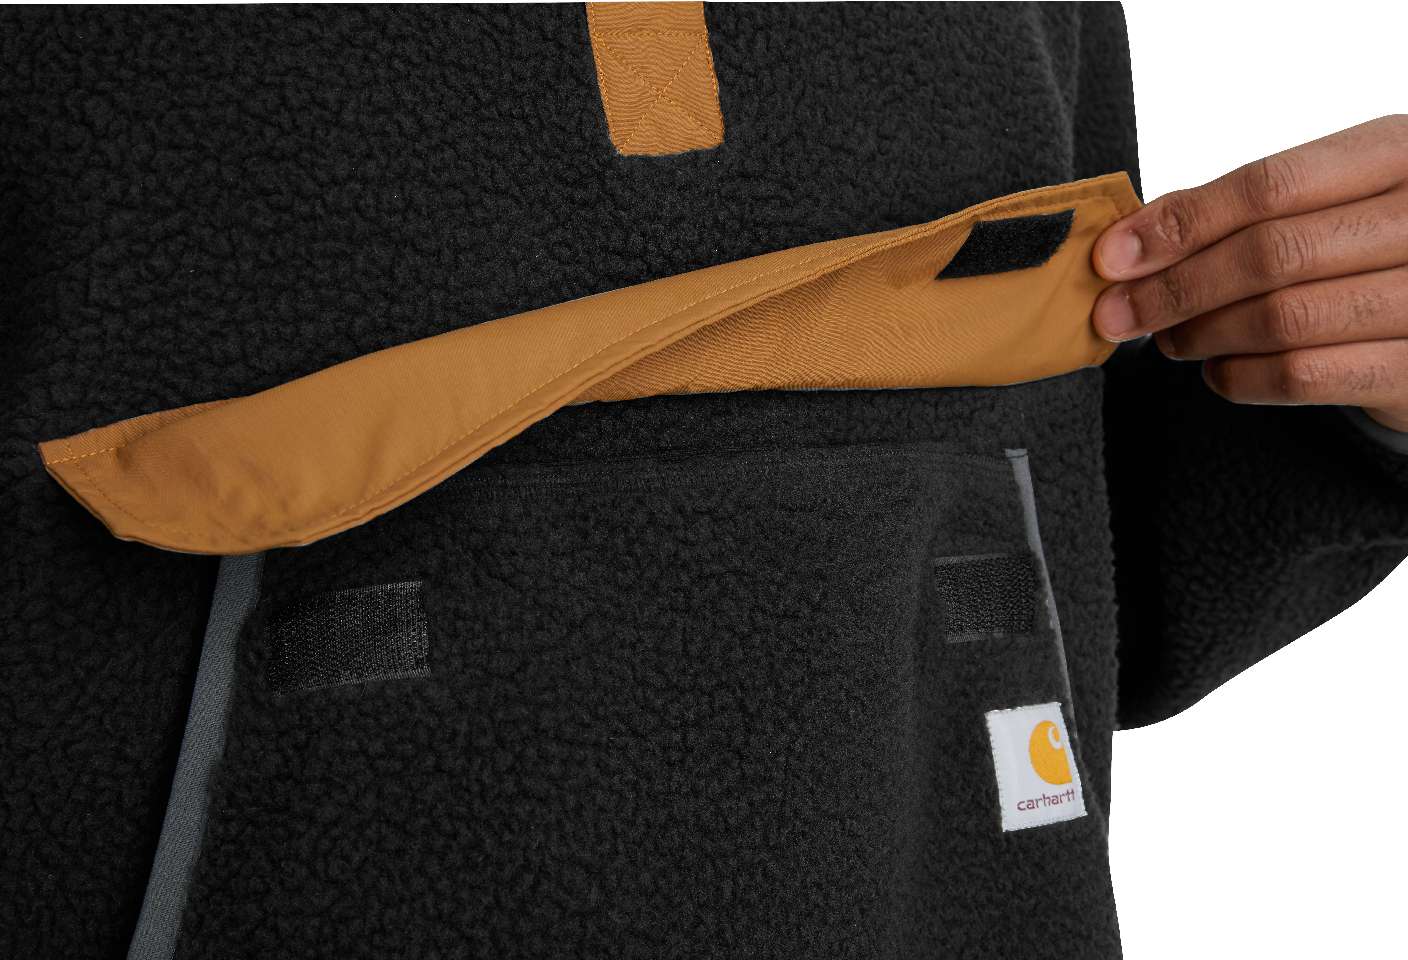 Reinforced front pocket has a top flap and a side entry